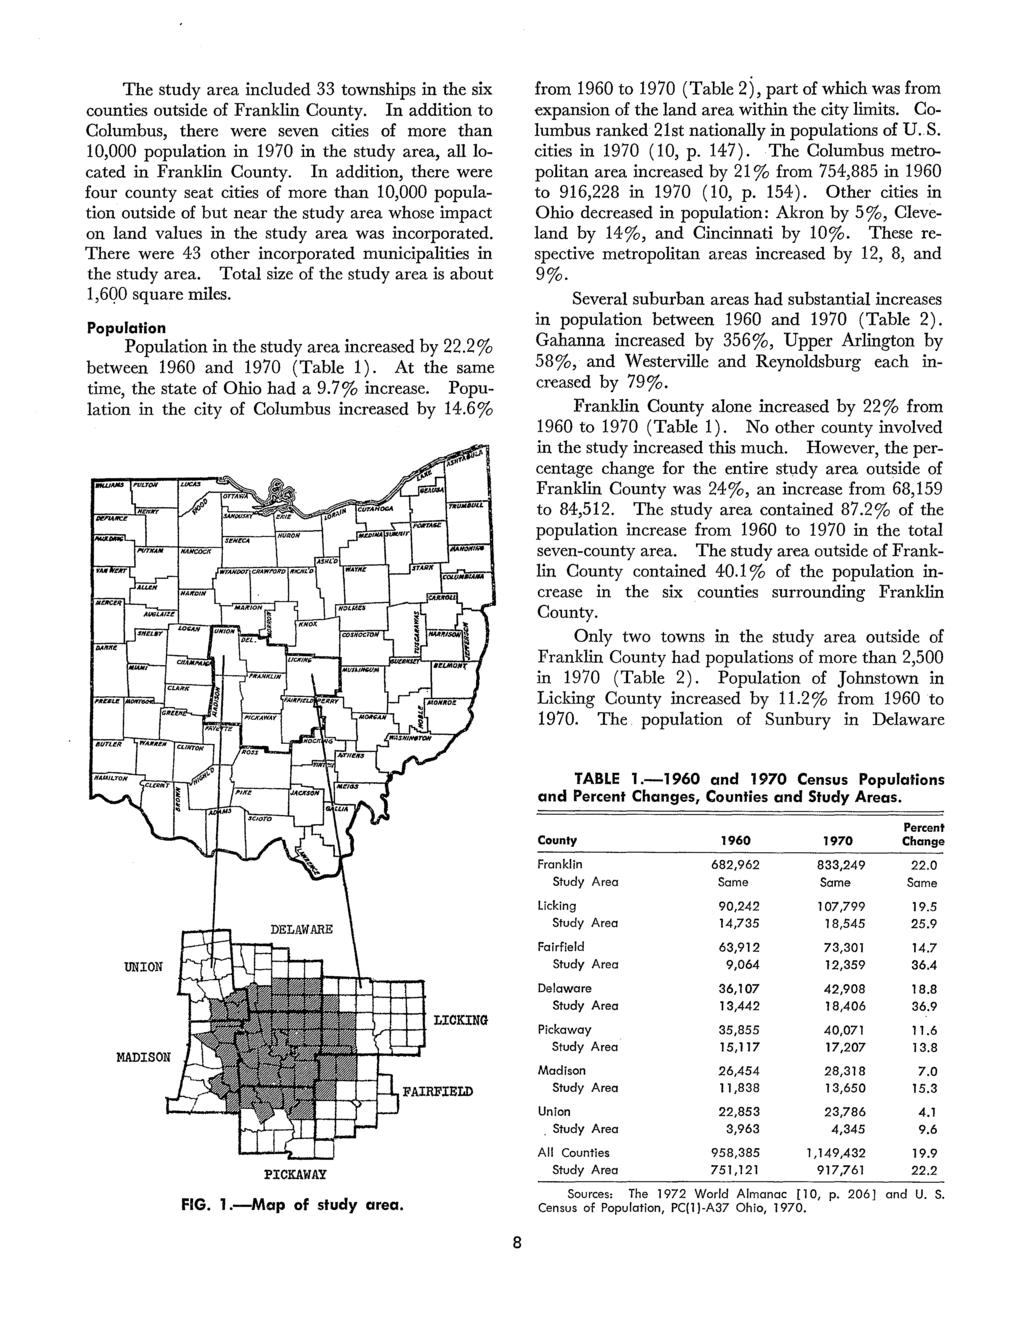 The study area included 33 townships in the six counties outside of Franklin County.